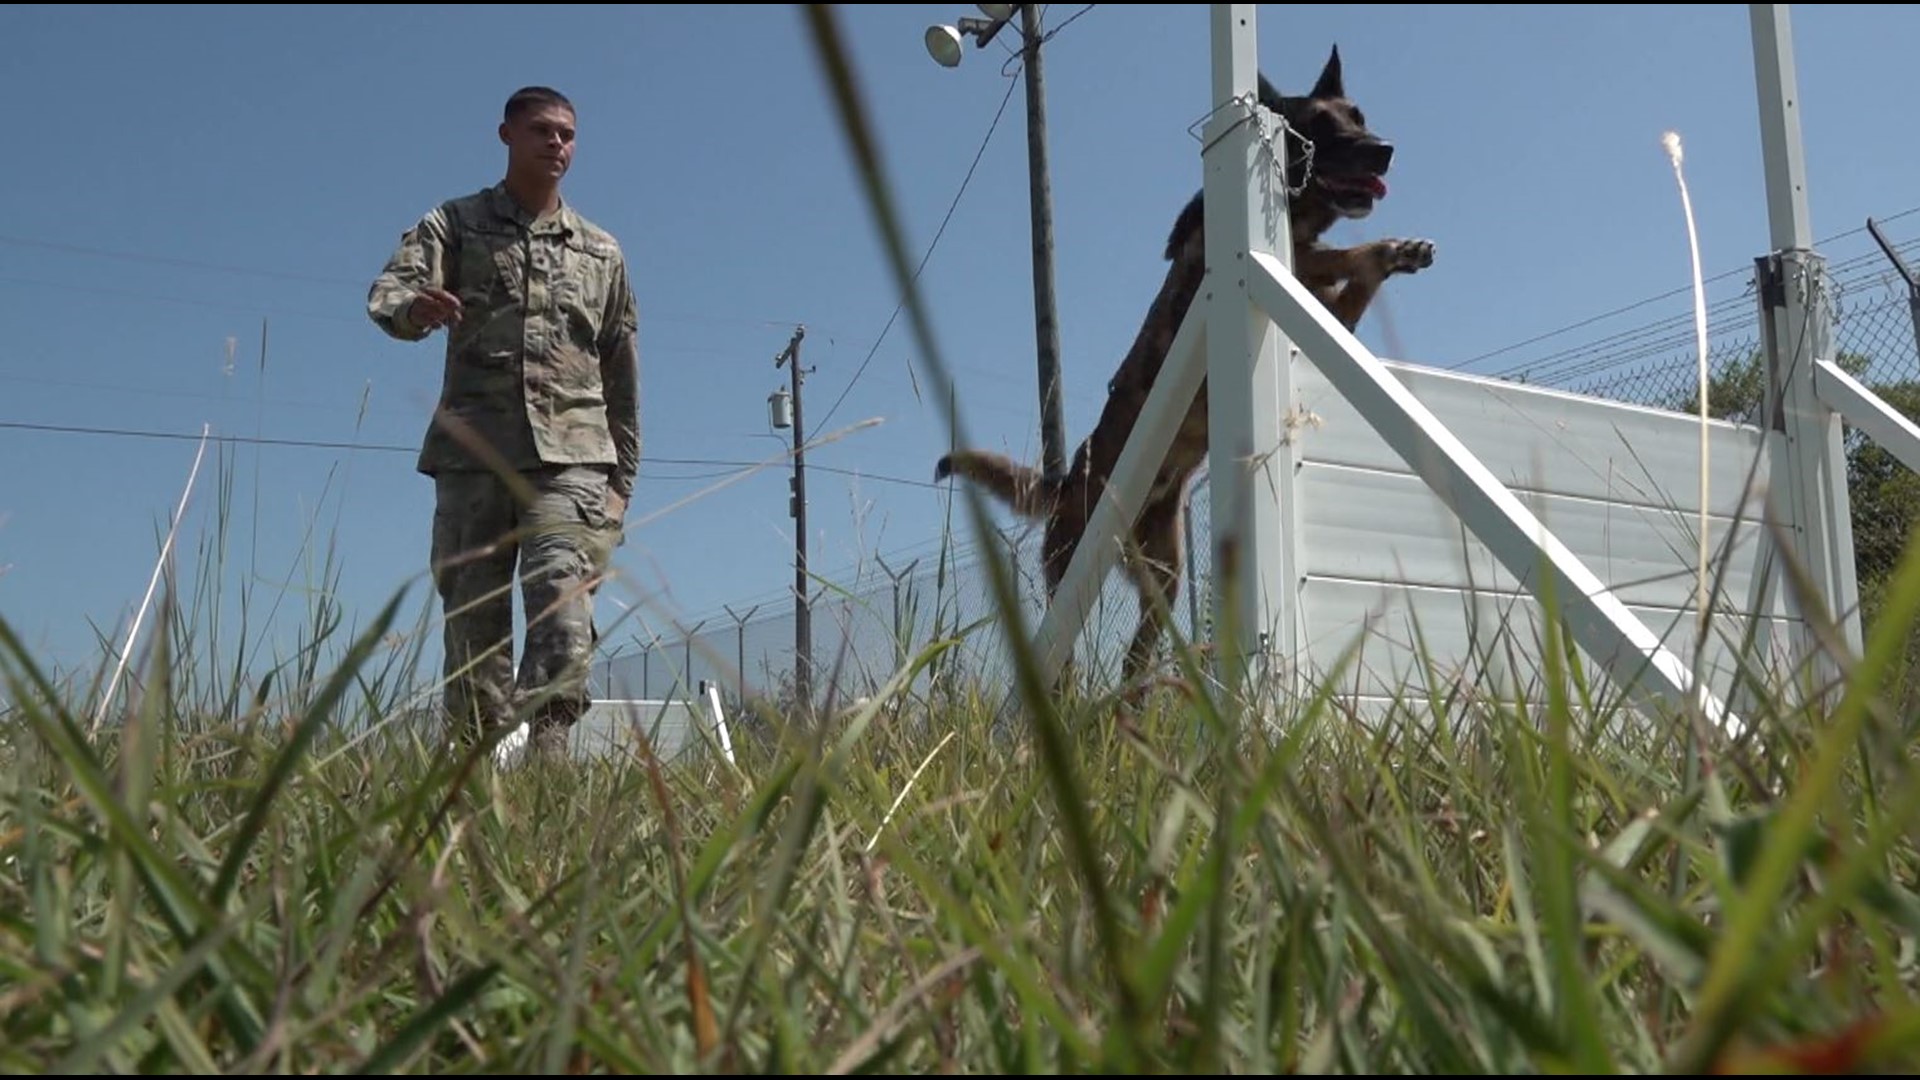 6 News caught up with Spc. Keelan Rader to talk about the special connection he has with his military dog Bobek.